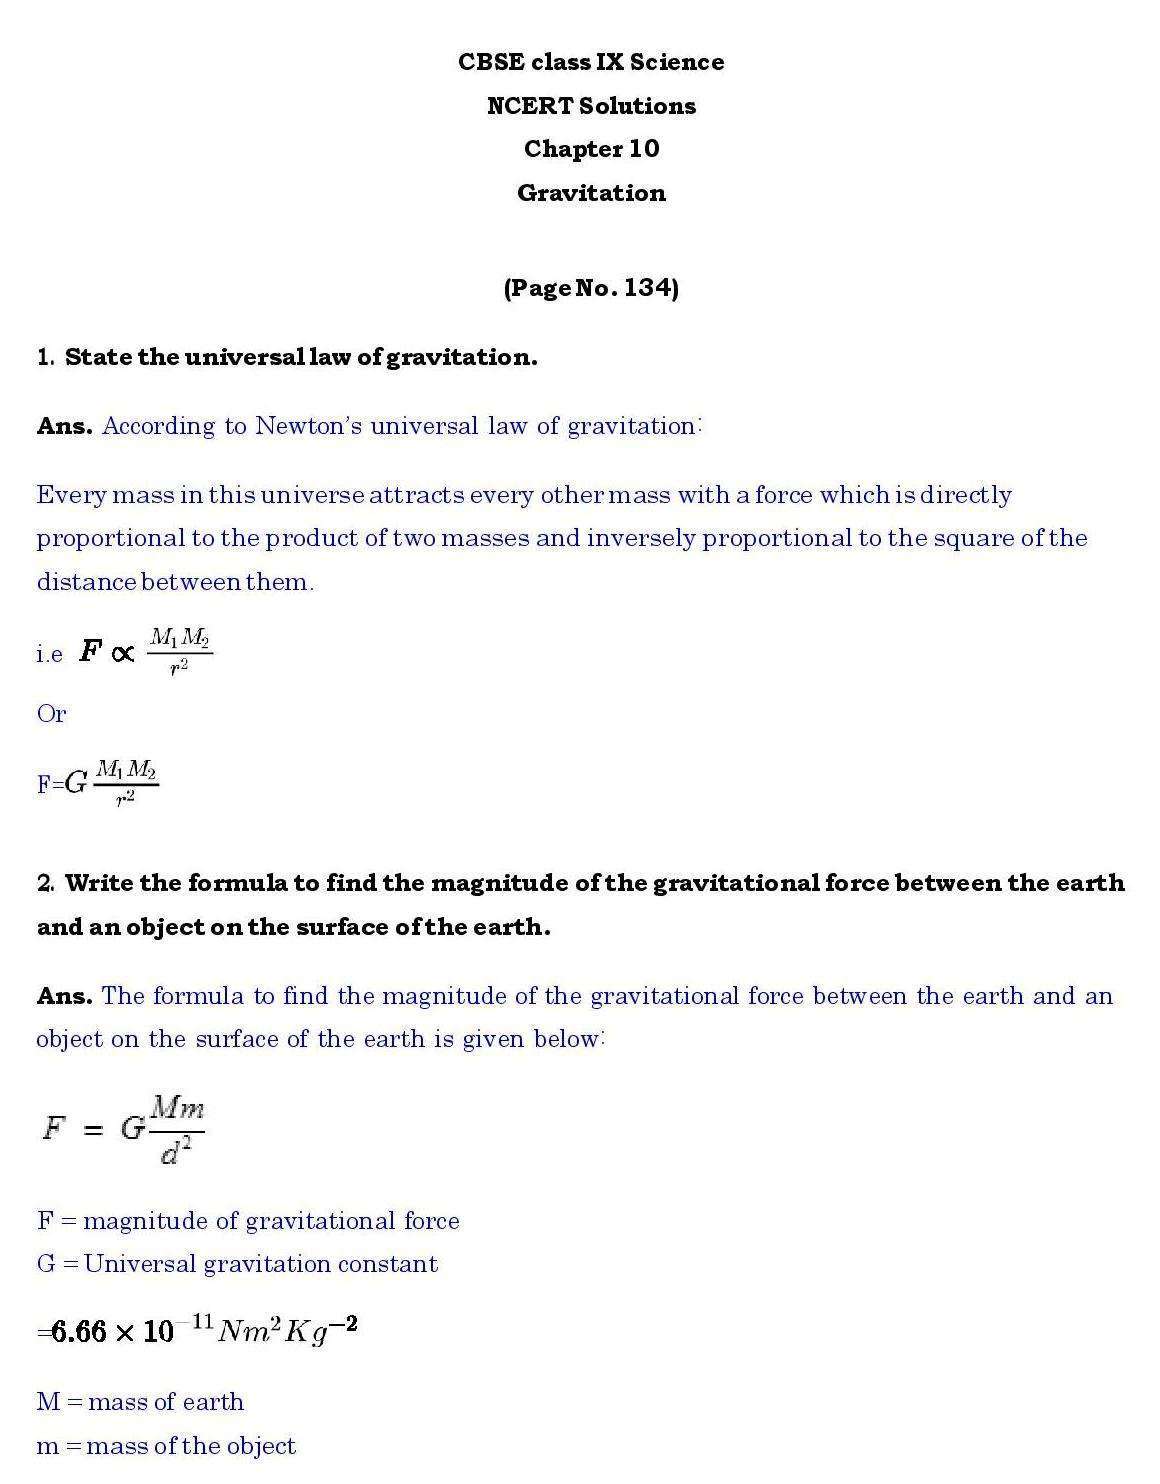 Ch 10 Science Gravitation page 001